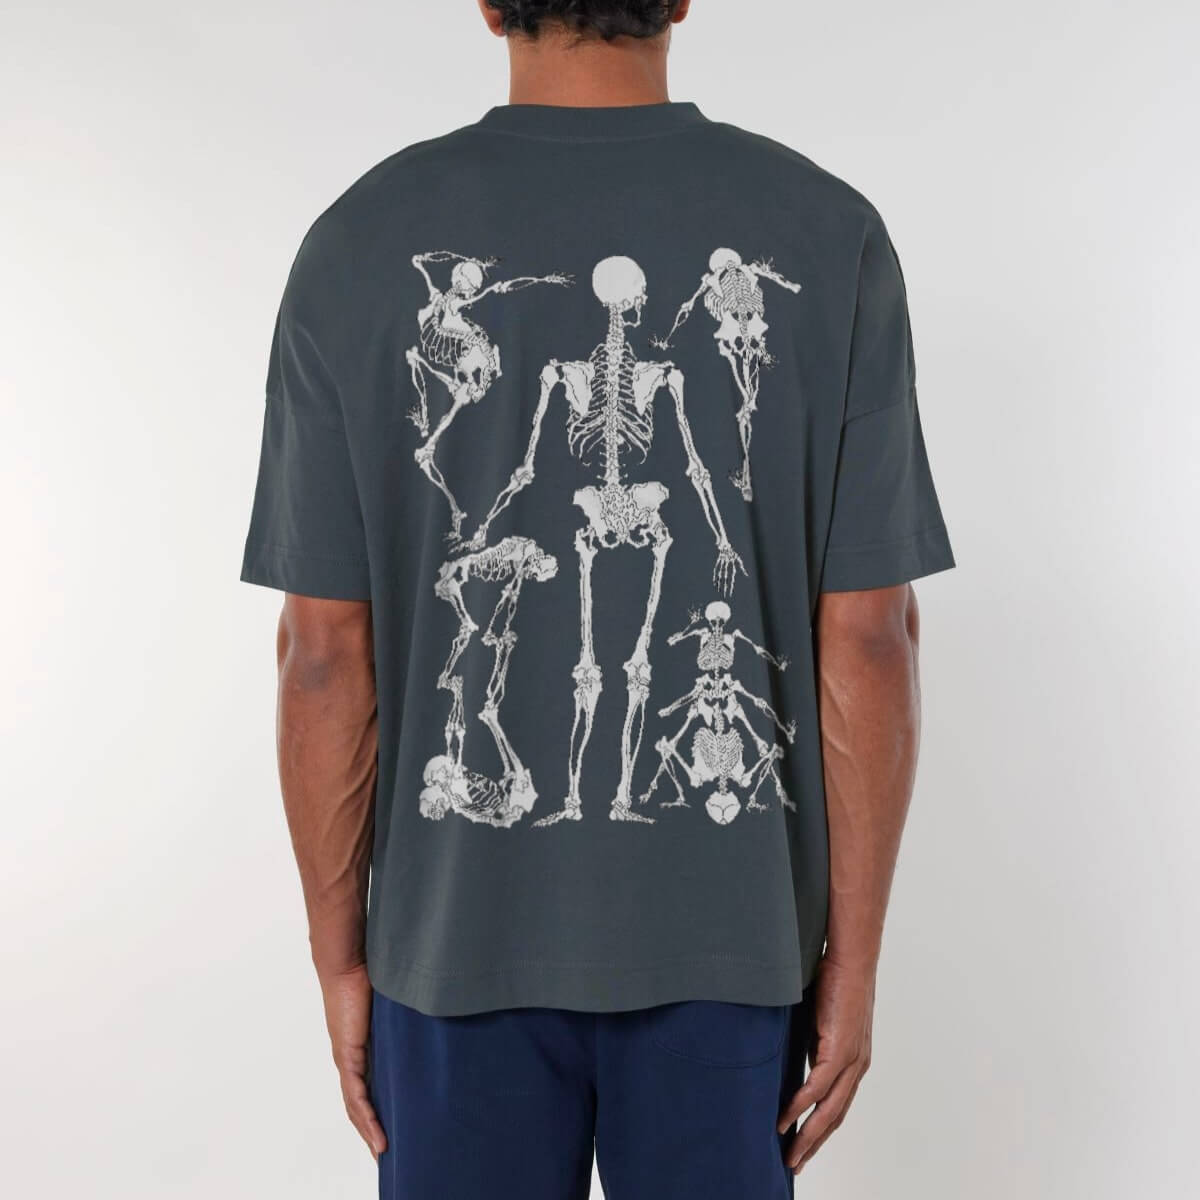 GRAVE PARTY T-SHIRT [INK GREY]